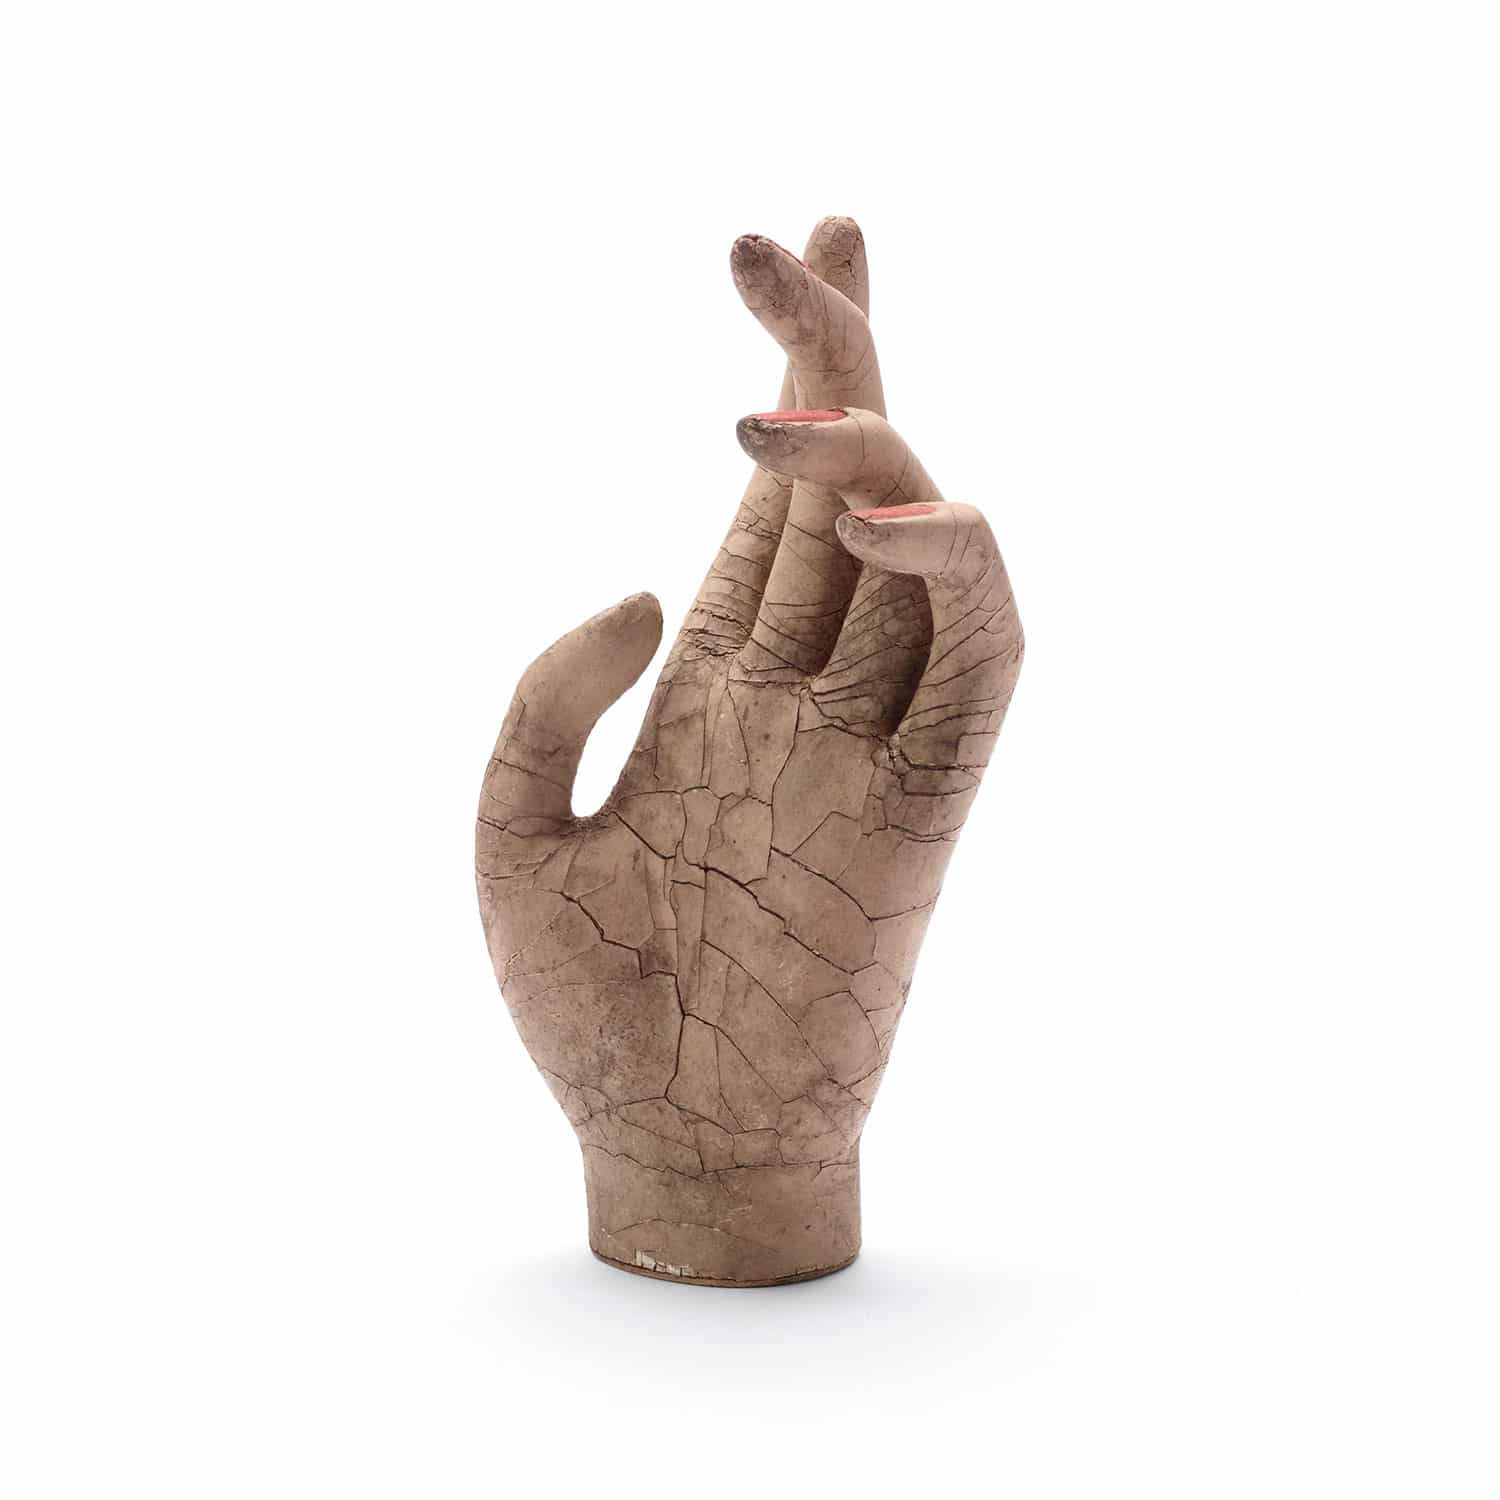 One Vintage Mannequin Hand! - Support Local - Capitol Hill